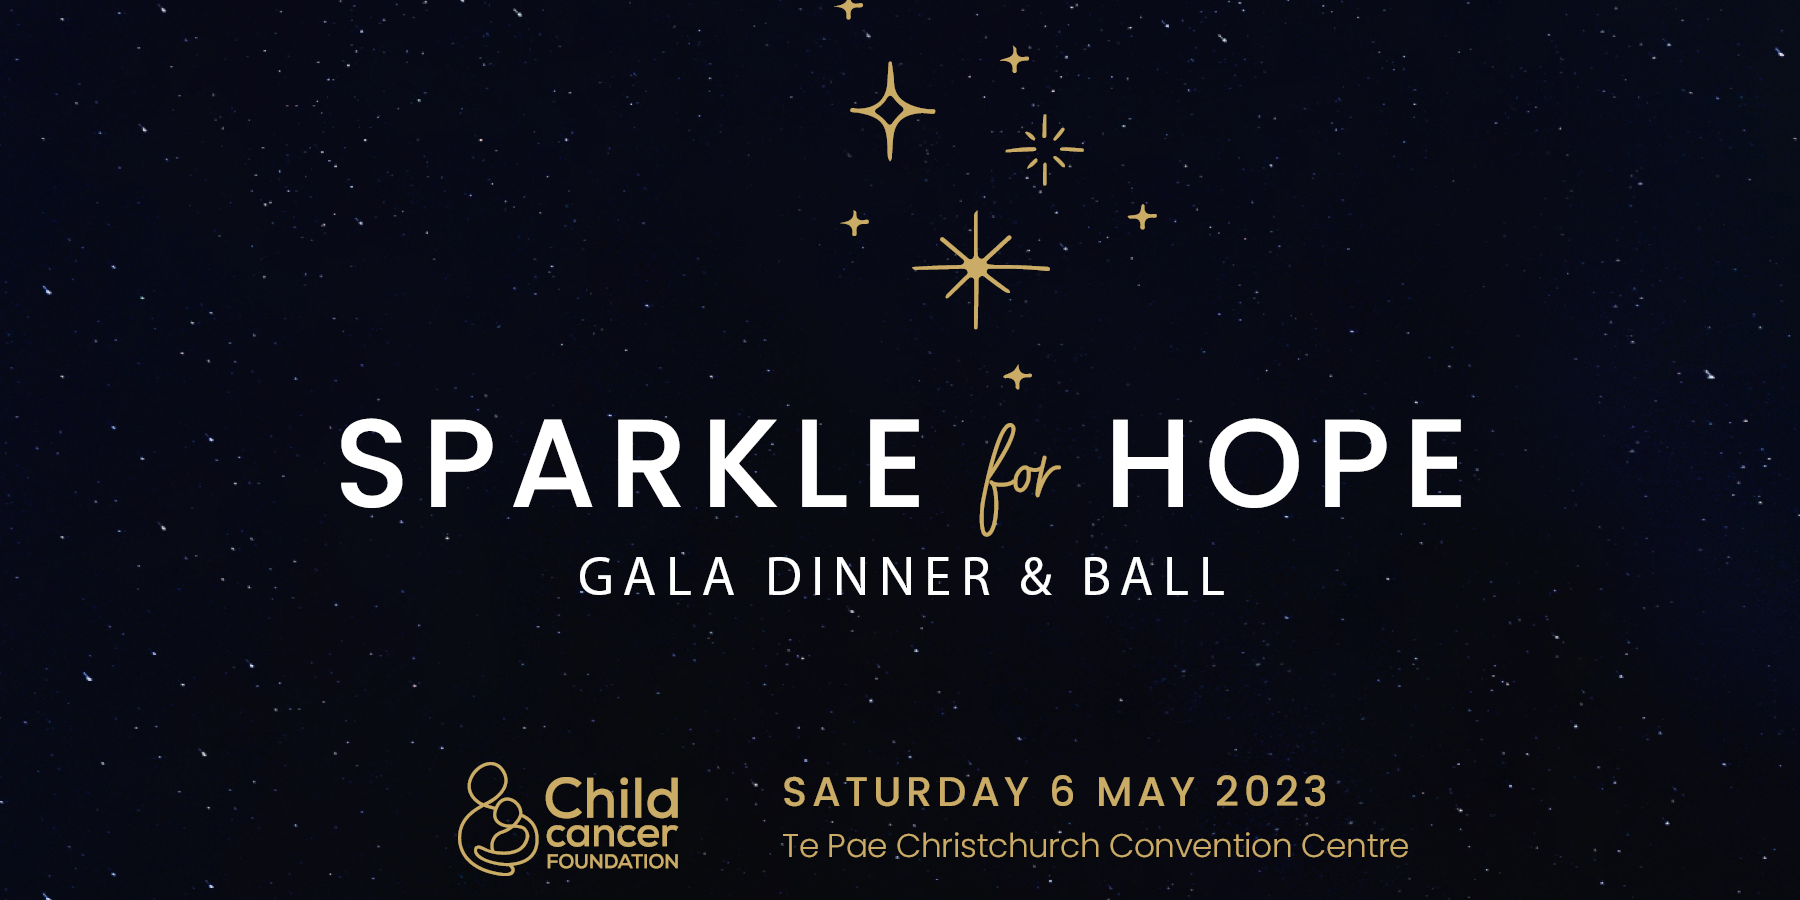 Sparkle for Hope